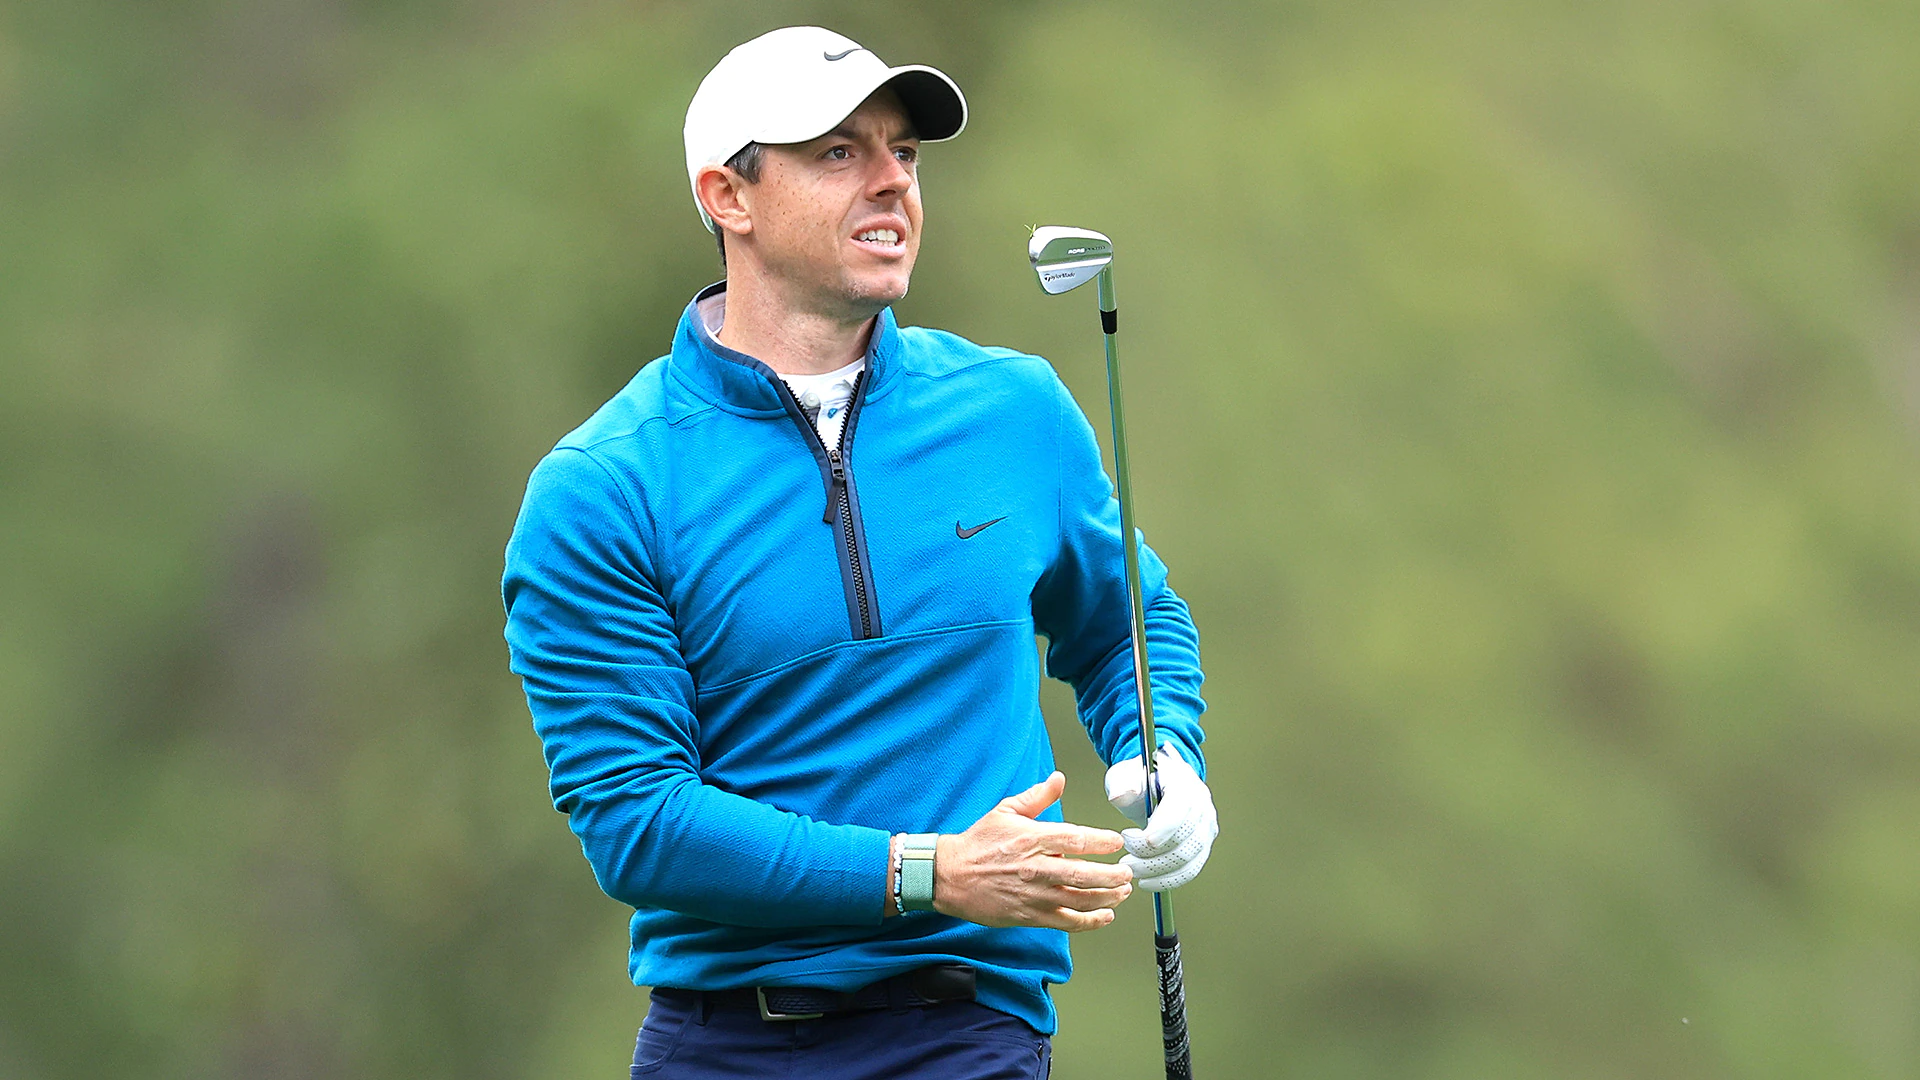 Wells Fargo odds: Rory McIlroy clear favorite at TPC Potomac